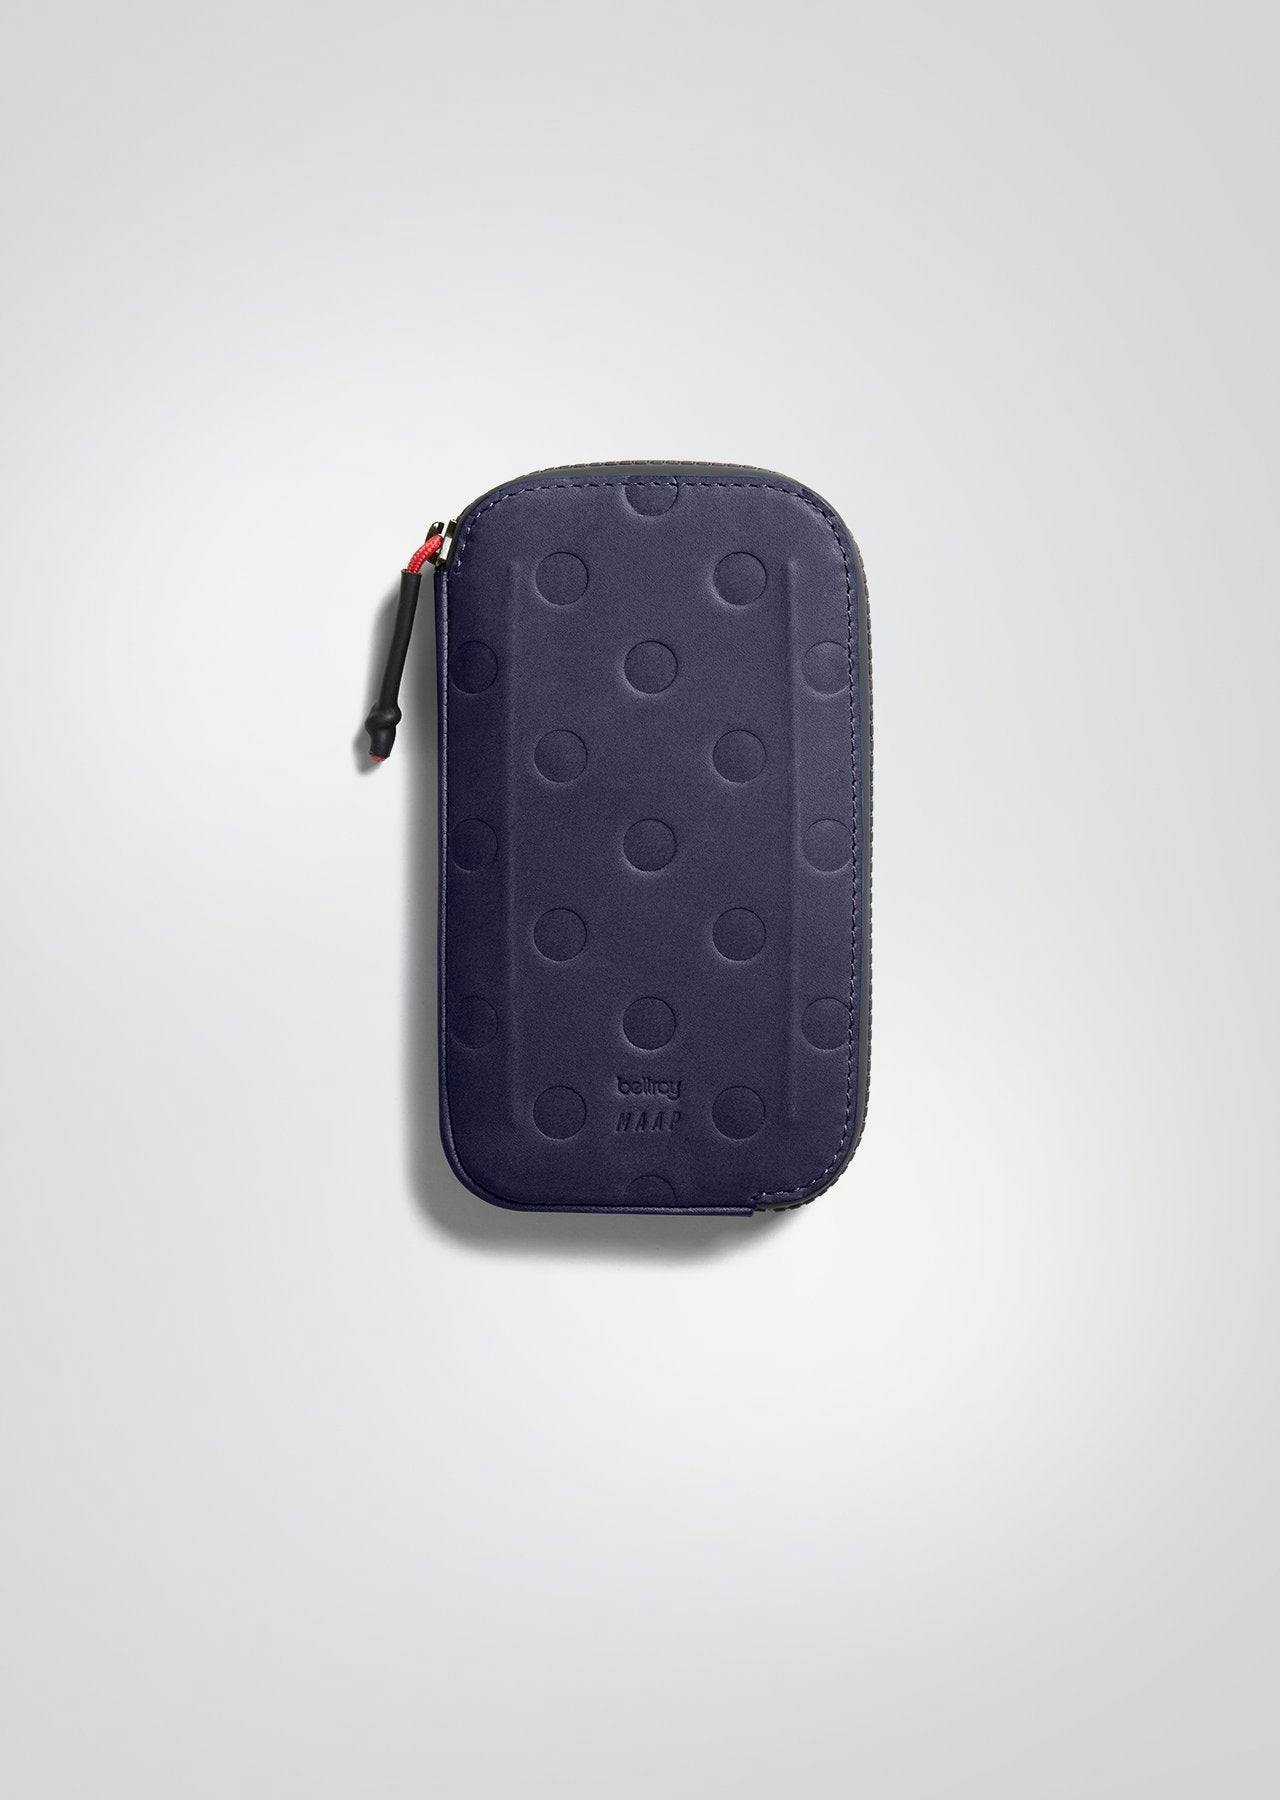 MAAP x Bellroy All-Conditions Phone Pocket